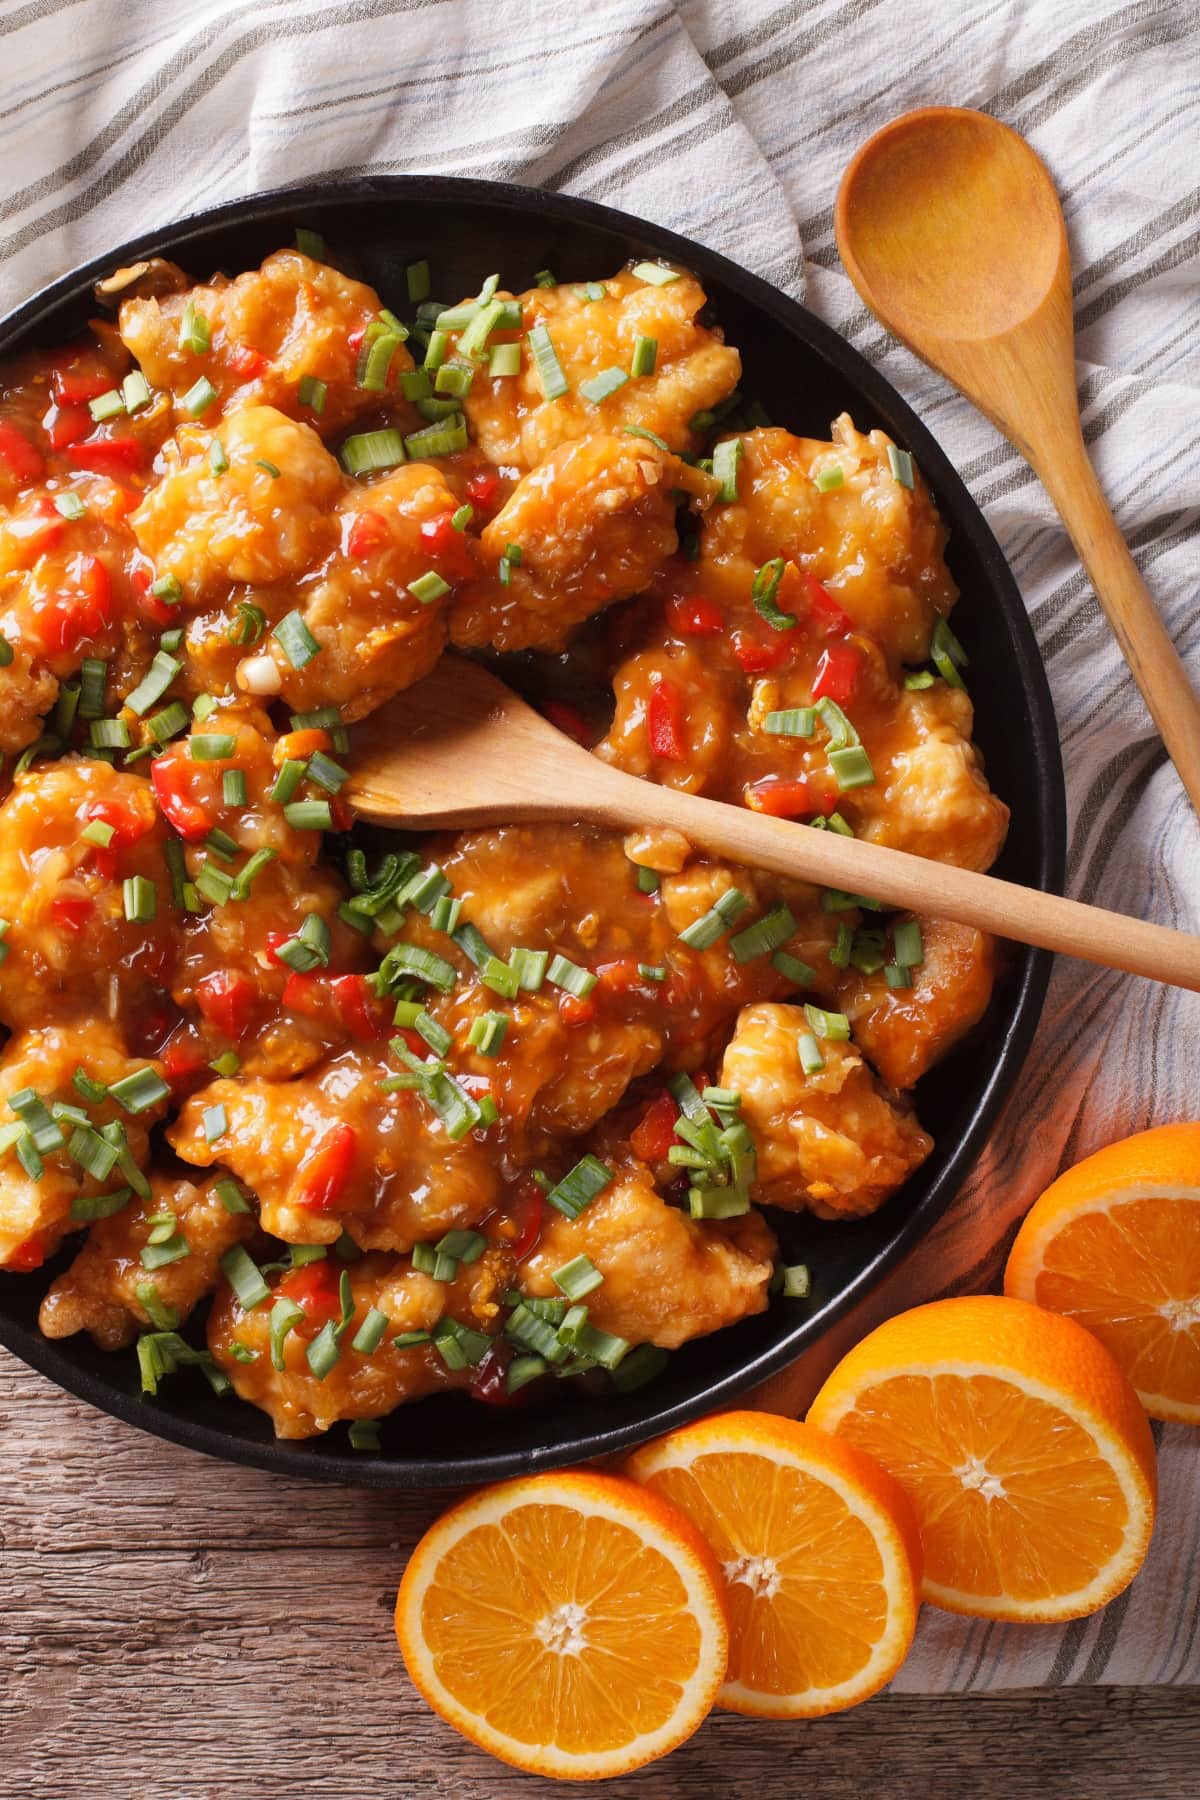 Orange Chicken with Creamy Sauce, Topped with Green Onions and Chili